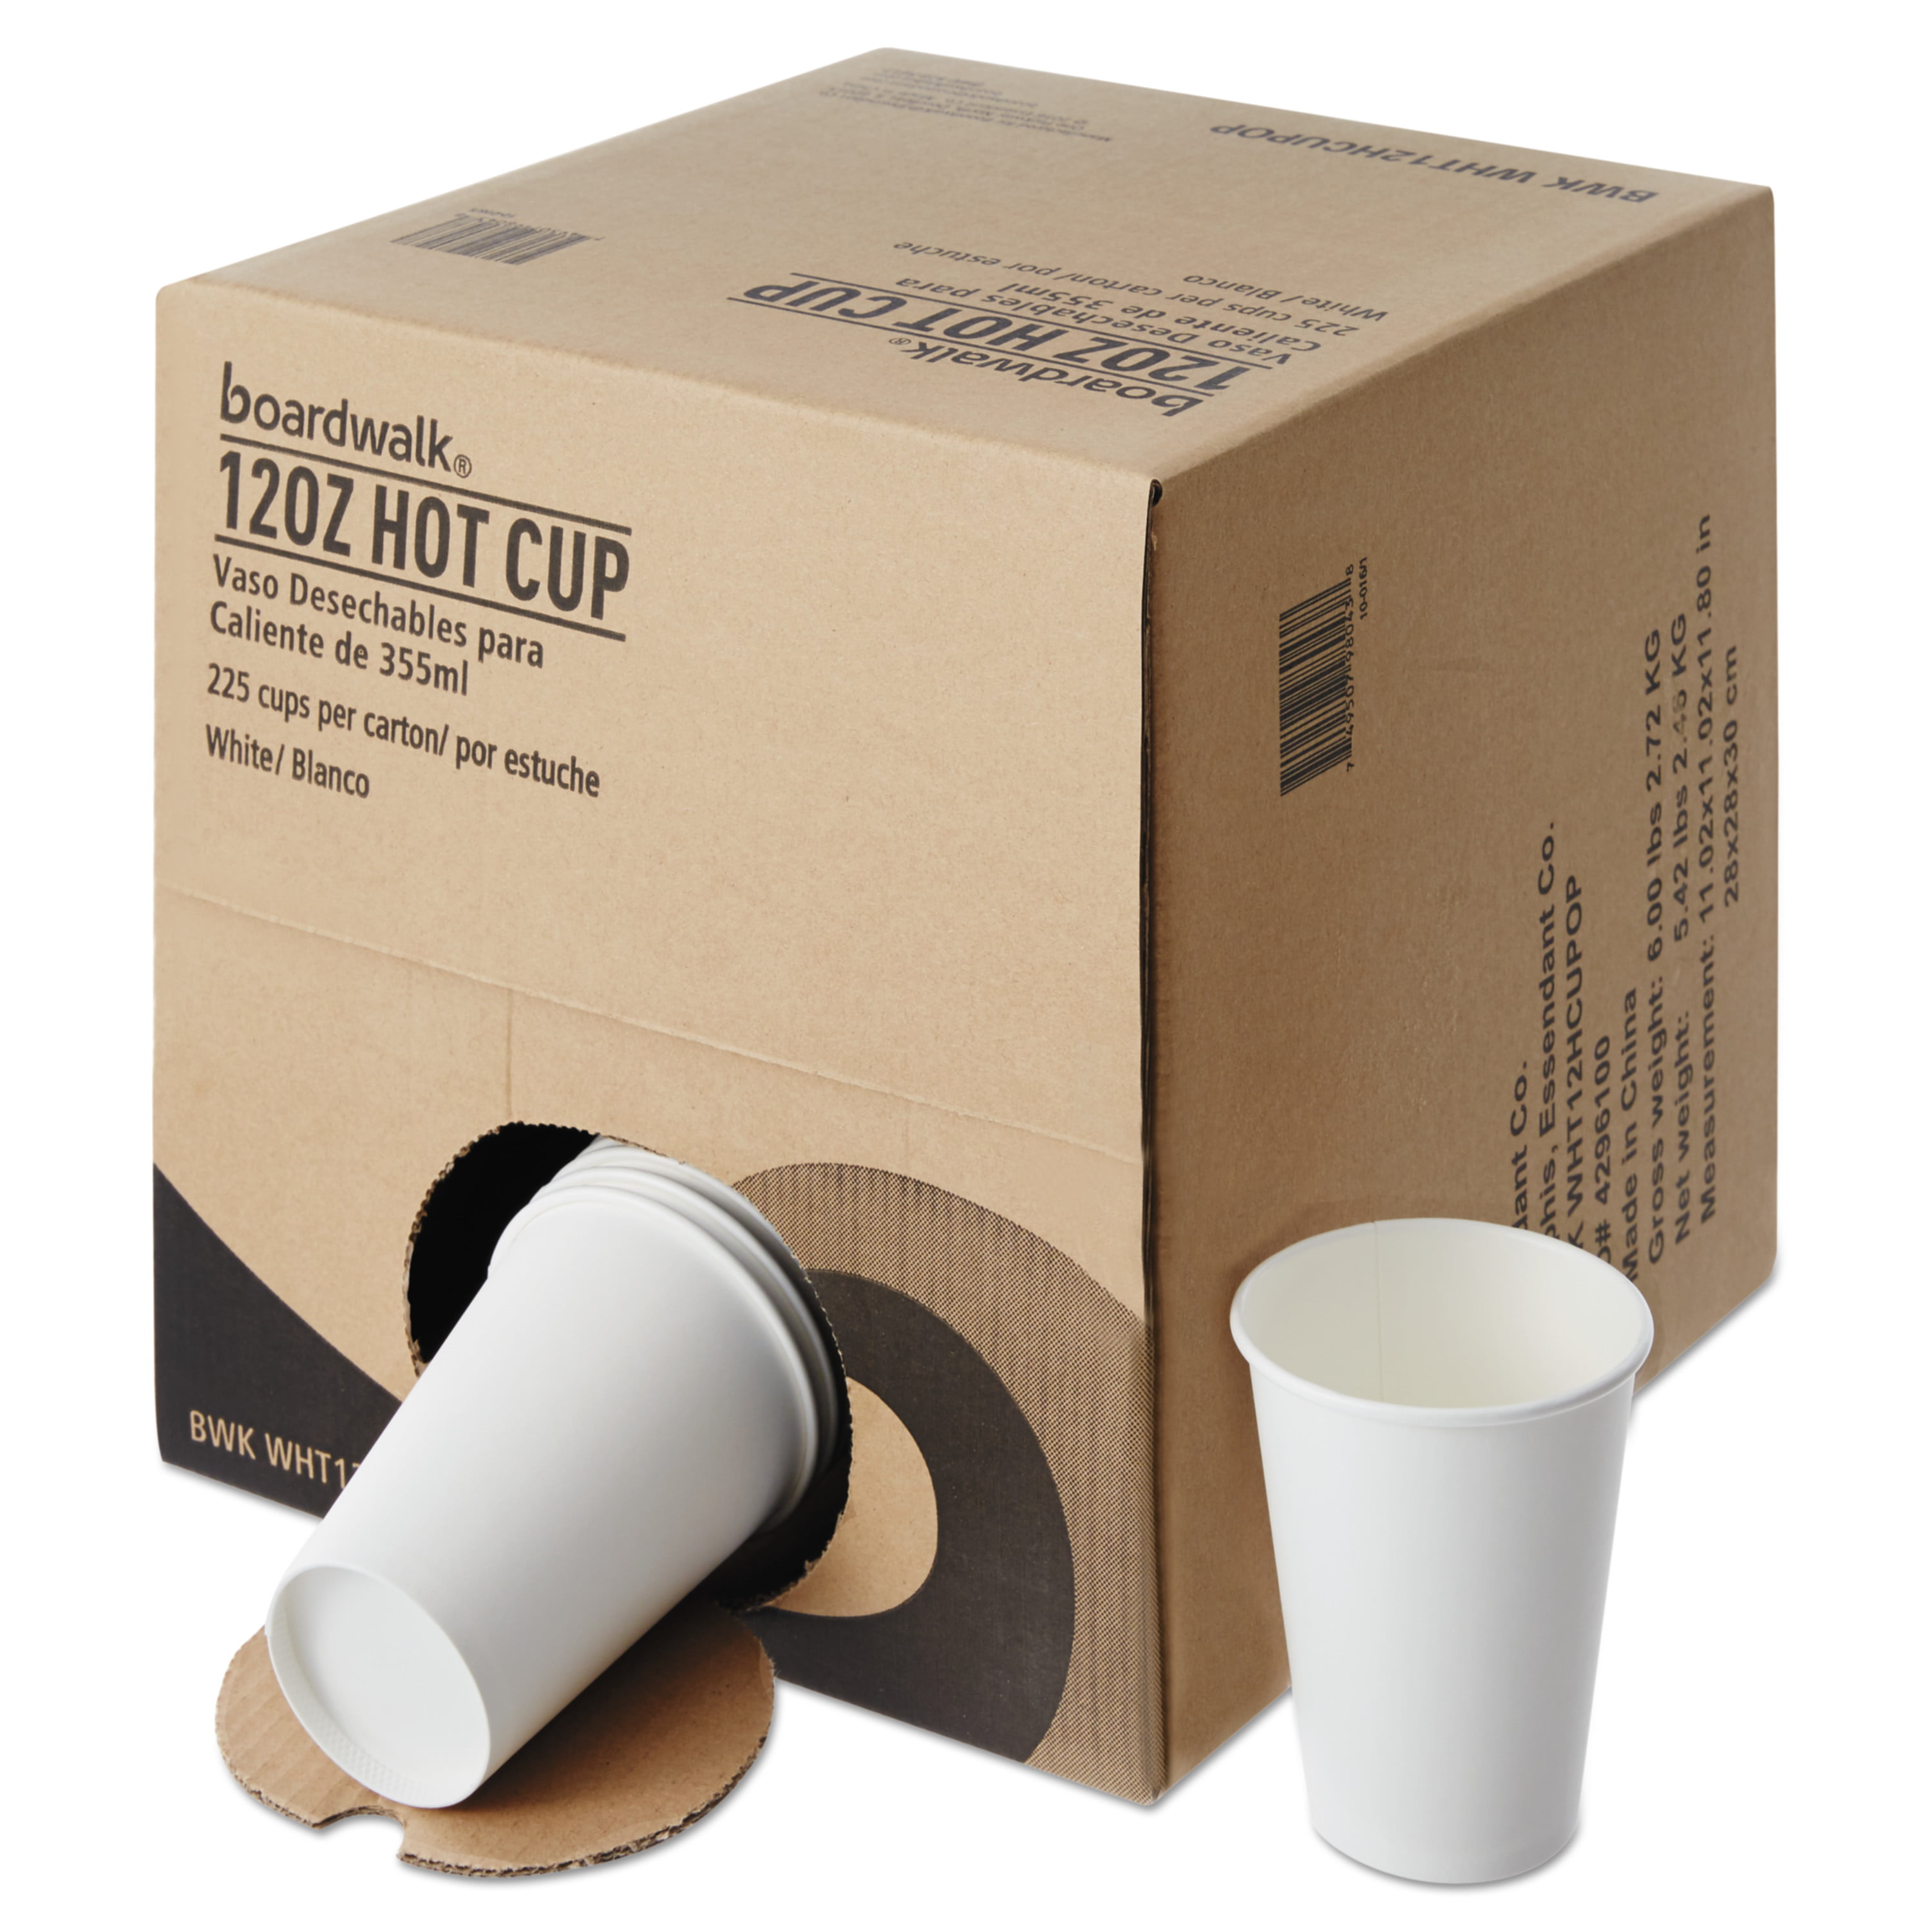 Boardwalk 12 oz. White Disposable Paper Cups, Hot Drinks, 20 Cups / Sleeve,  50 Sleeves / Carton BWKWHT12HCUP - The Home Depot